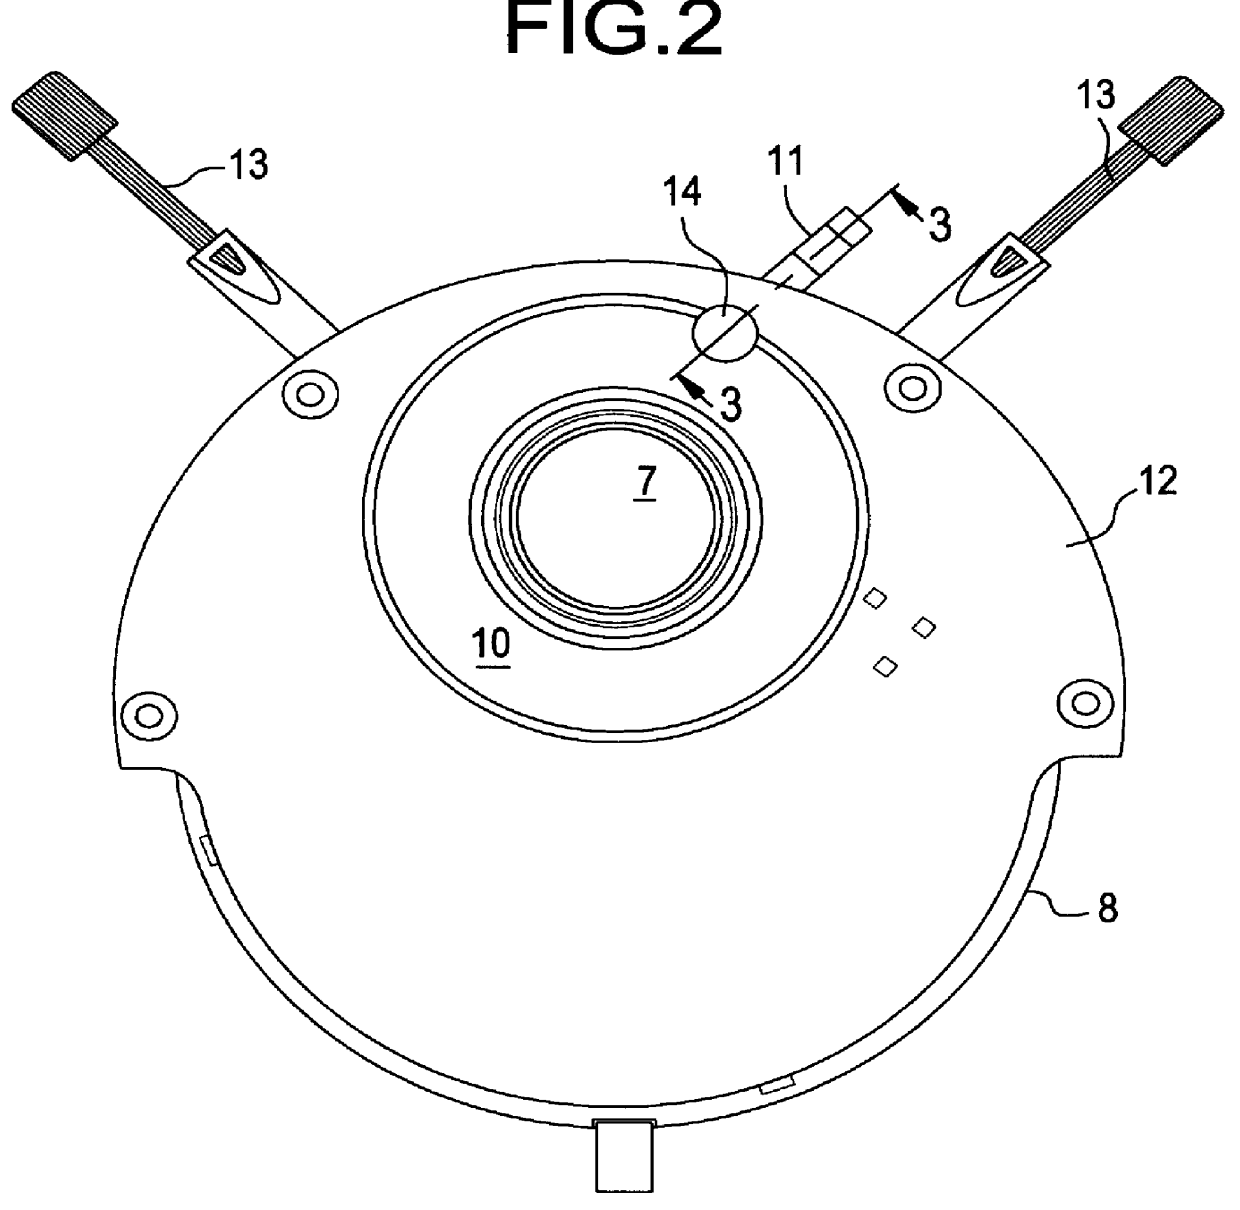 Microscope condenser with an integrated catch pan